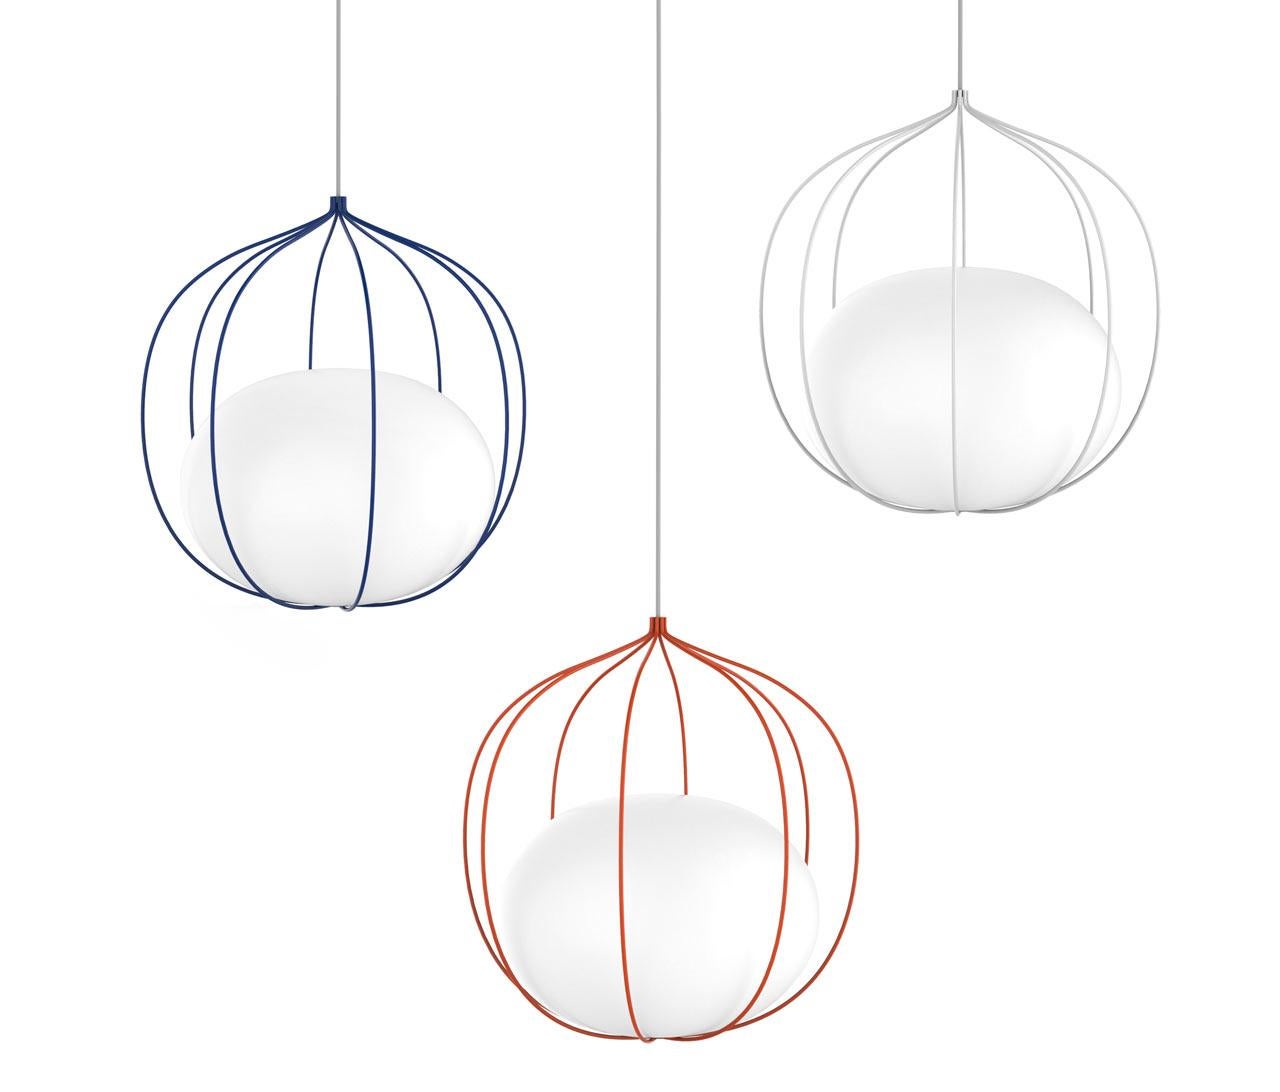 The hoop pendant incorporates a metal cage-like frame made up of eight wires. Inside the frame, a globe-shaped glass diffuser rests at the bottom. The Minimalist design and organic shape of this fixture is achieved by having the electrical wire fed